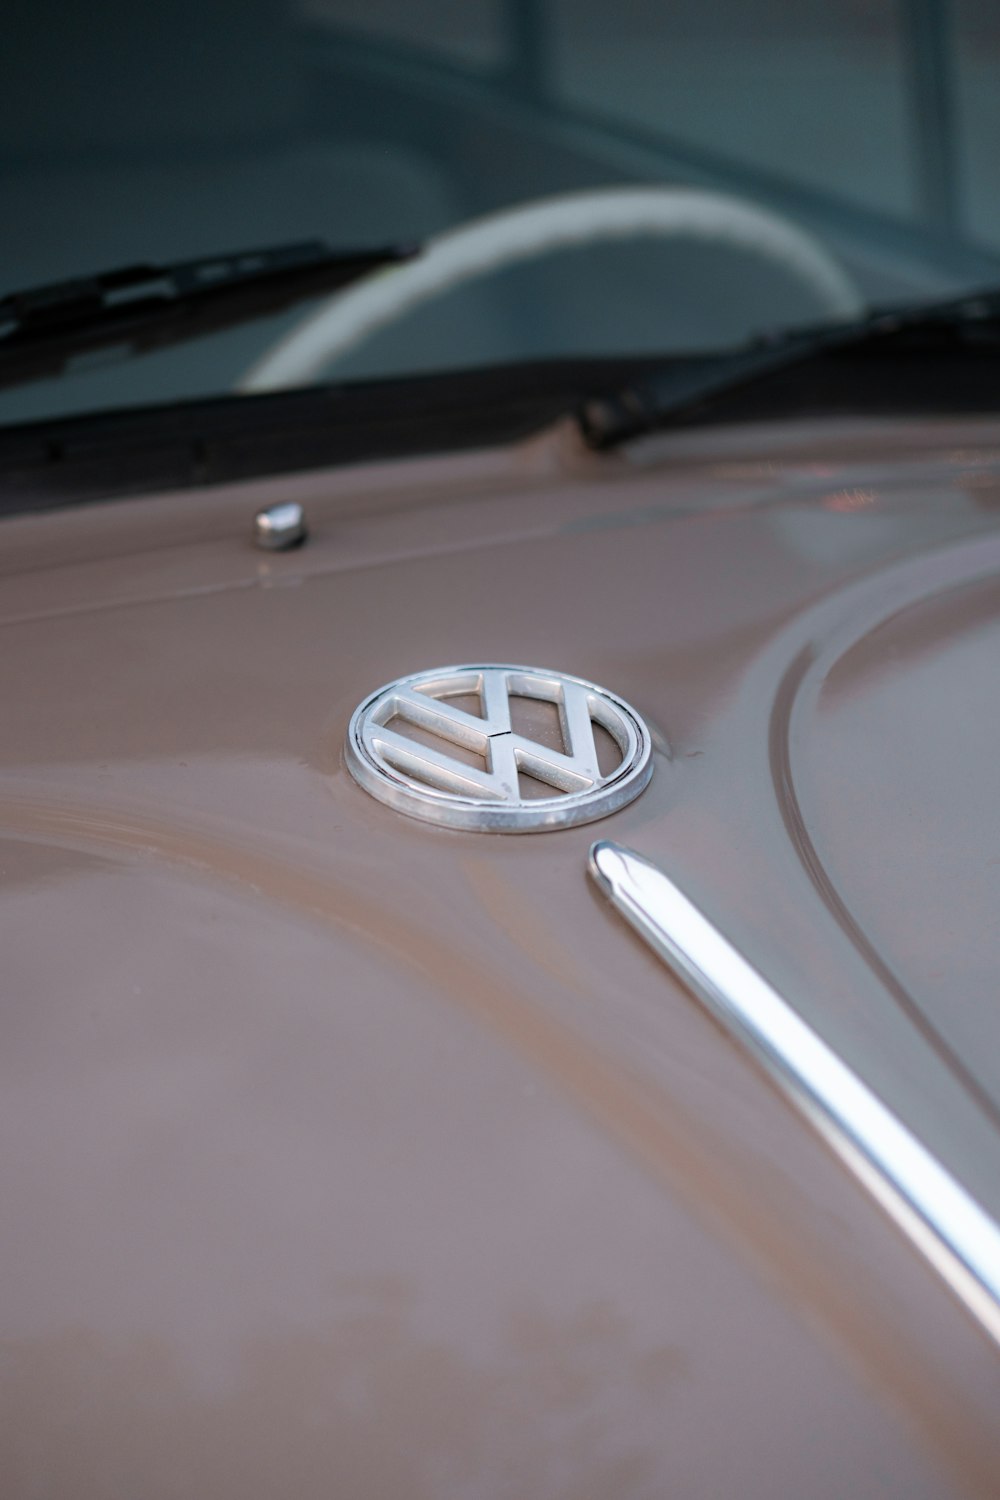 a close up of a volkswagen emblem on the hood of a car